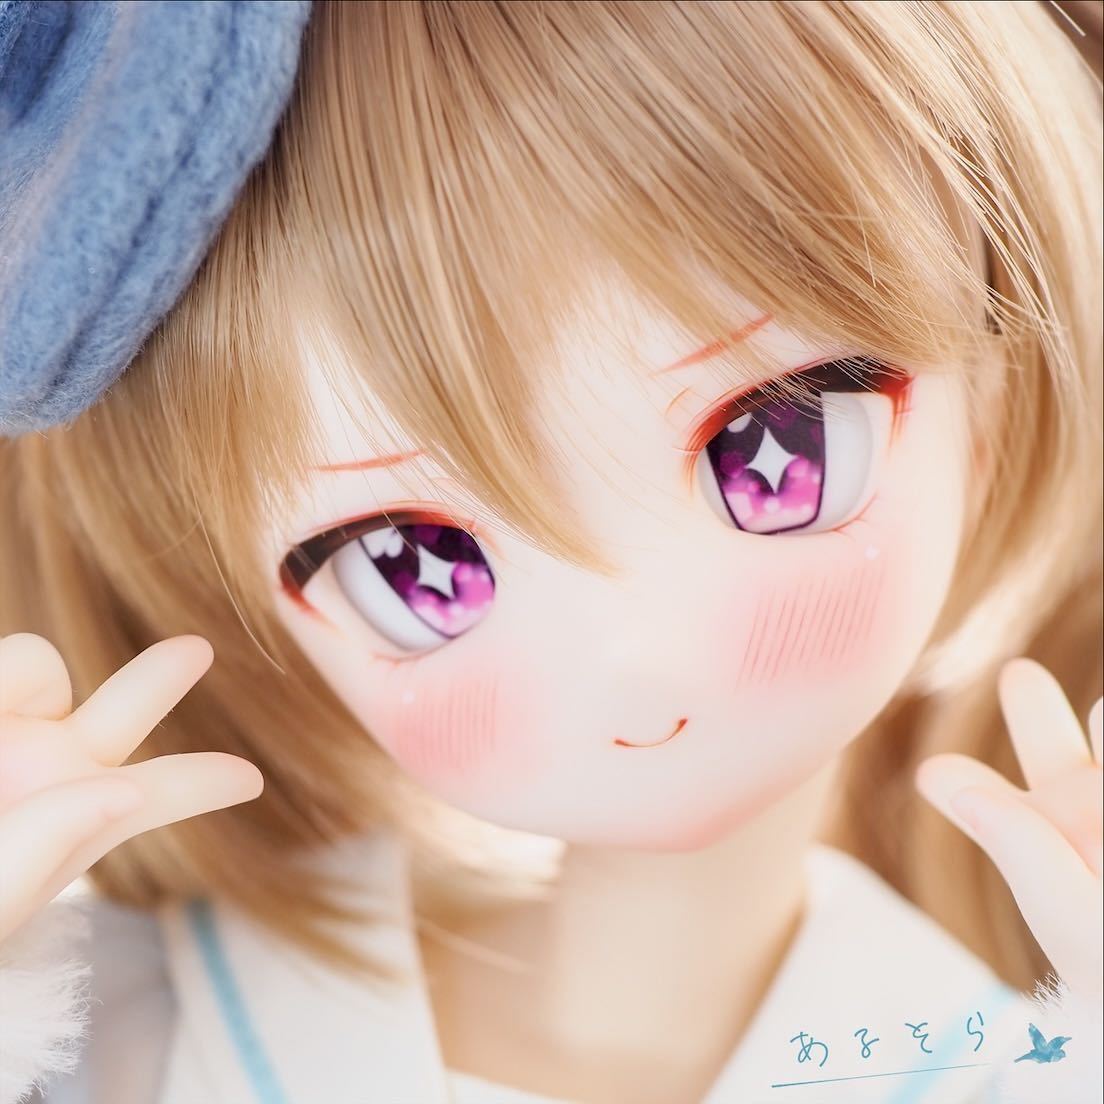 Search Results for "Dolls" /Buyee Buyee   Japanese Proxy